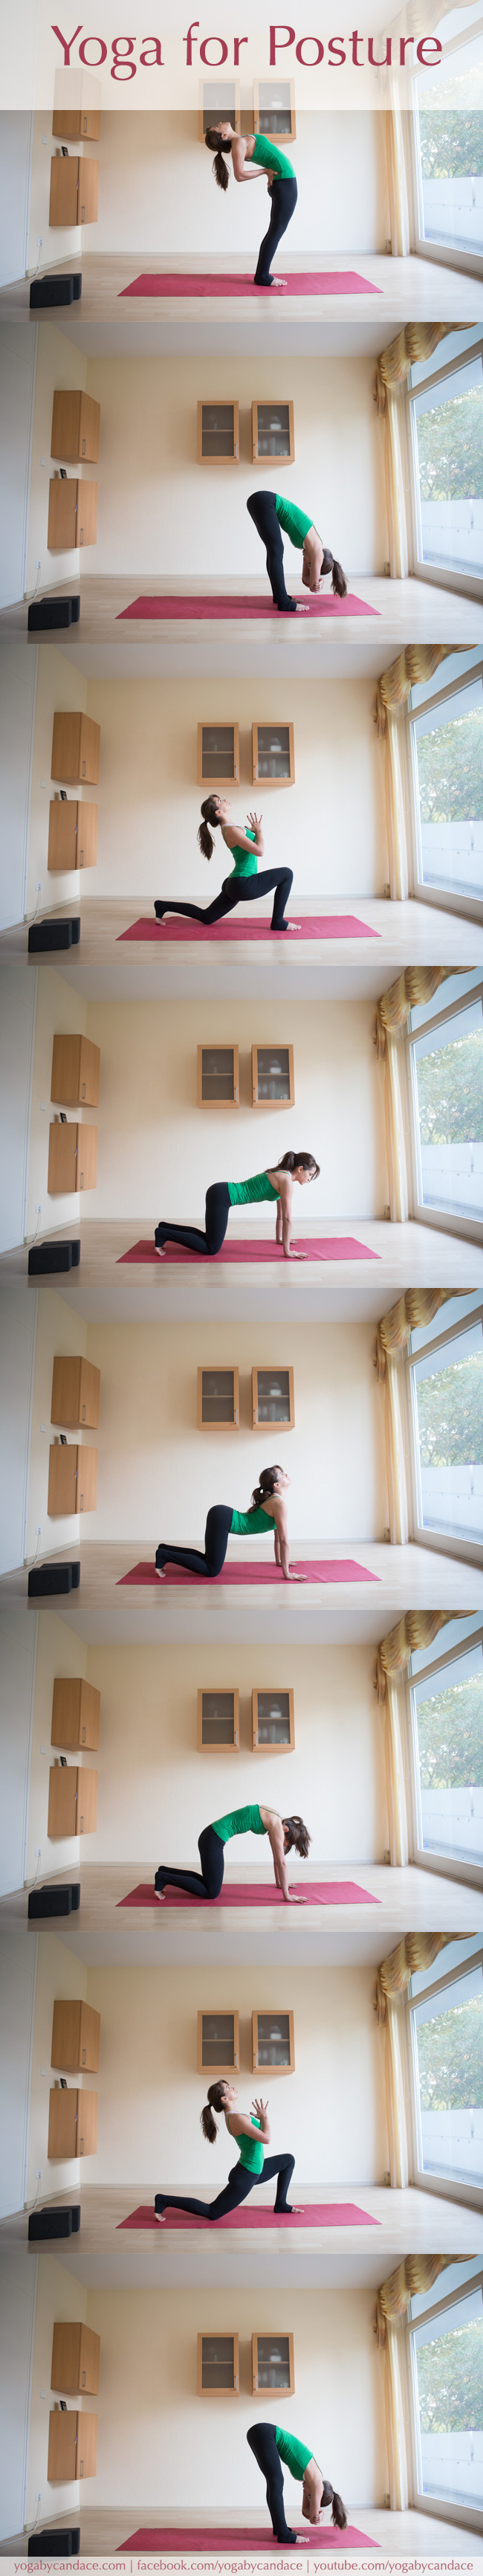 Yoga to Improve Posture, Physical Therapy